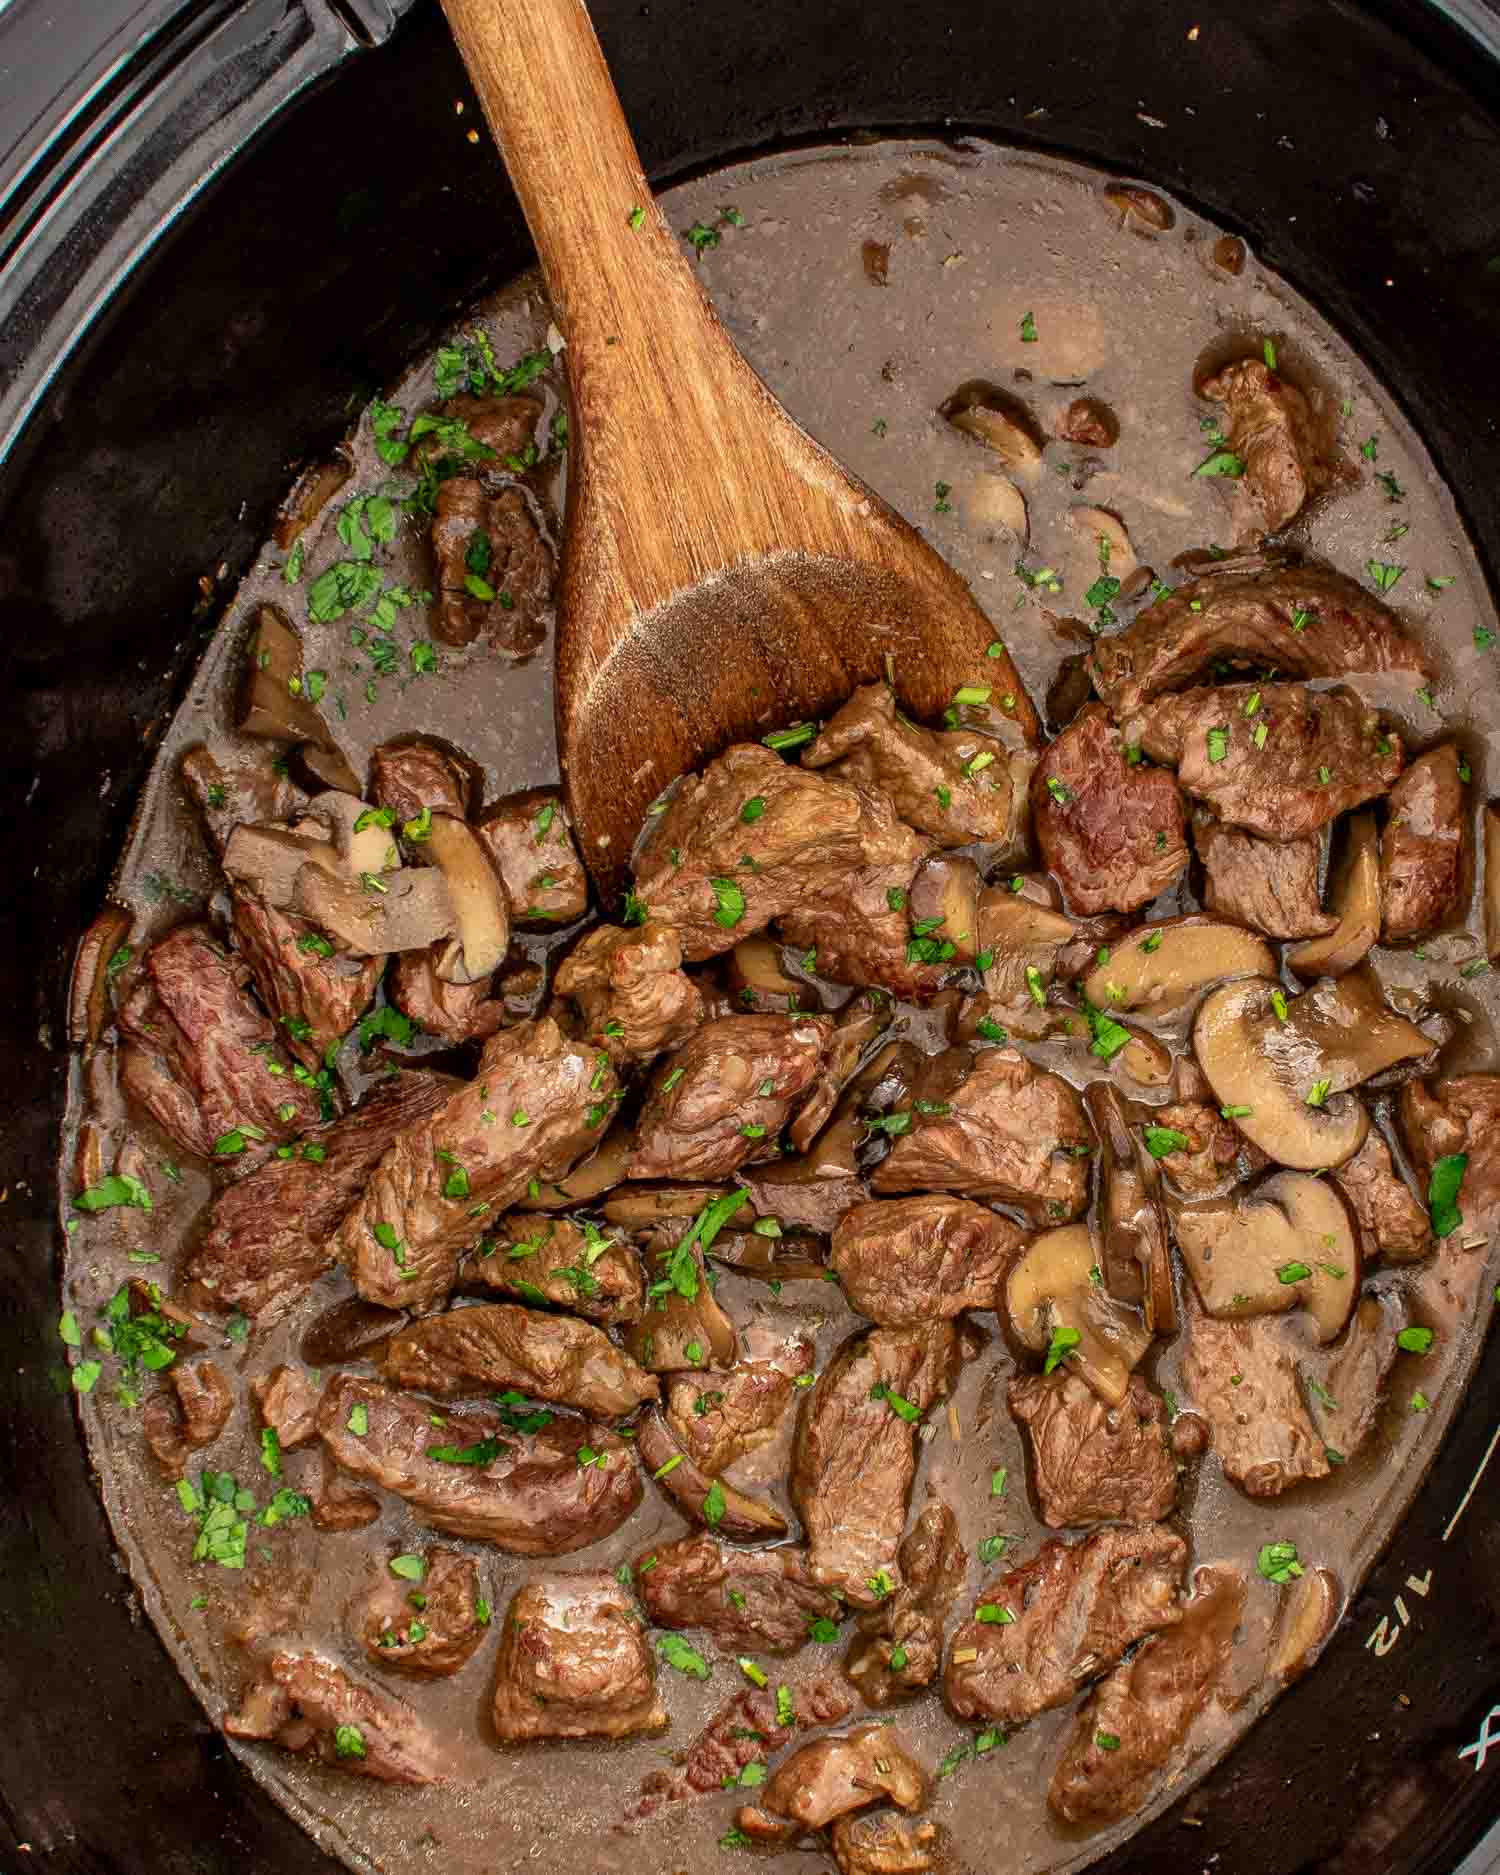 a crockpot with steak and gravy garnished with parsley.